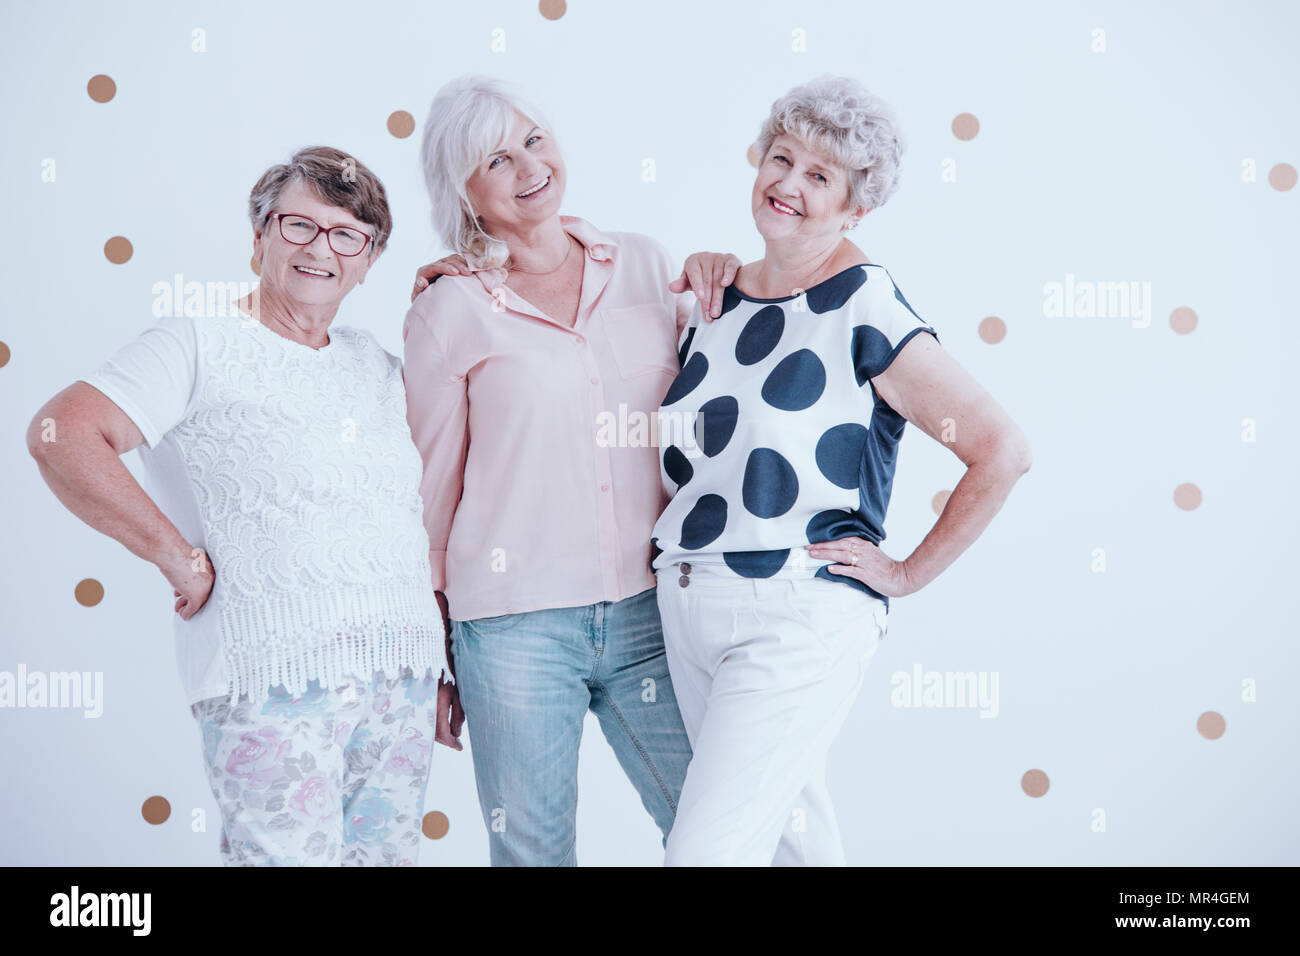 Group of friendly senior women enjoying meeting against white wall with gold dots Stock Photo